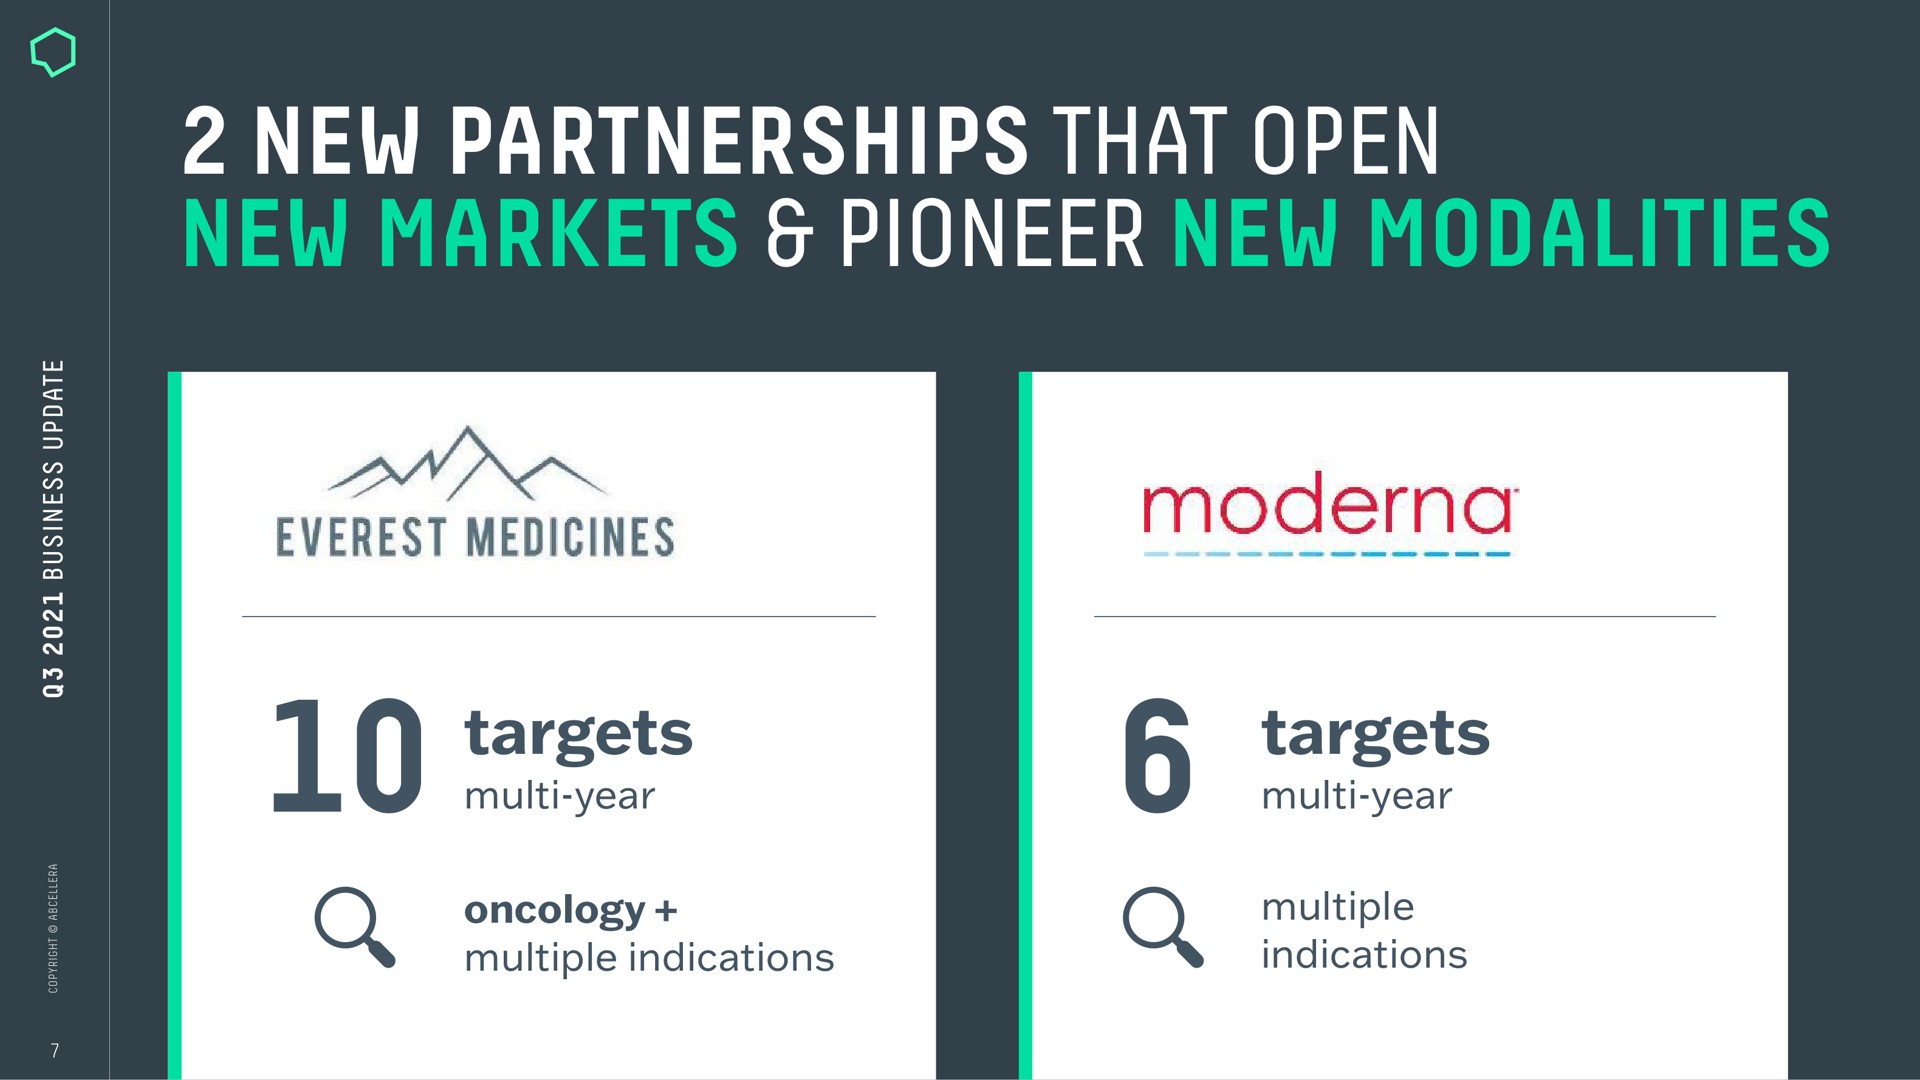 new partnerships that open new markets pioneer new modalities targets targets am a medicines oncology multiple | AbCellera